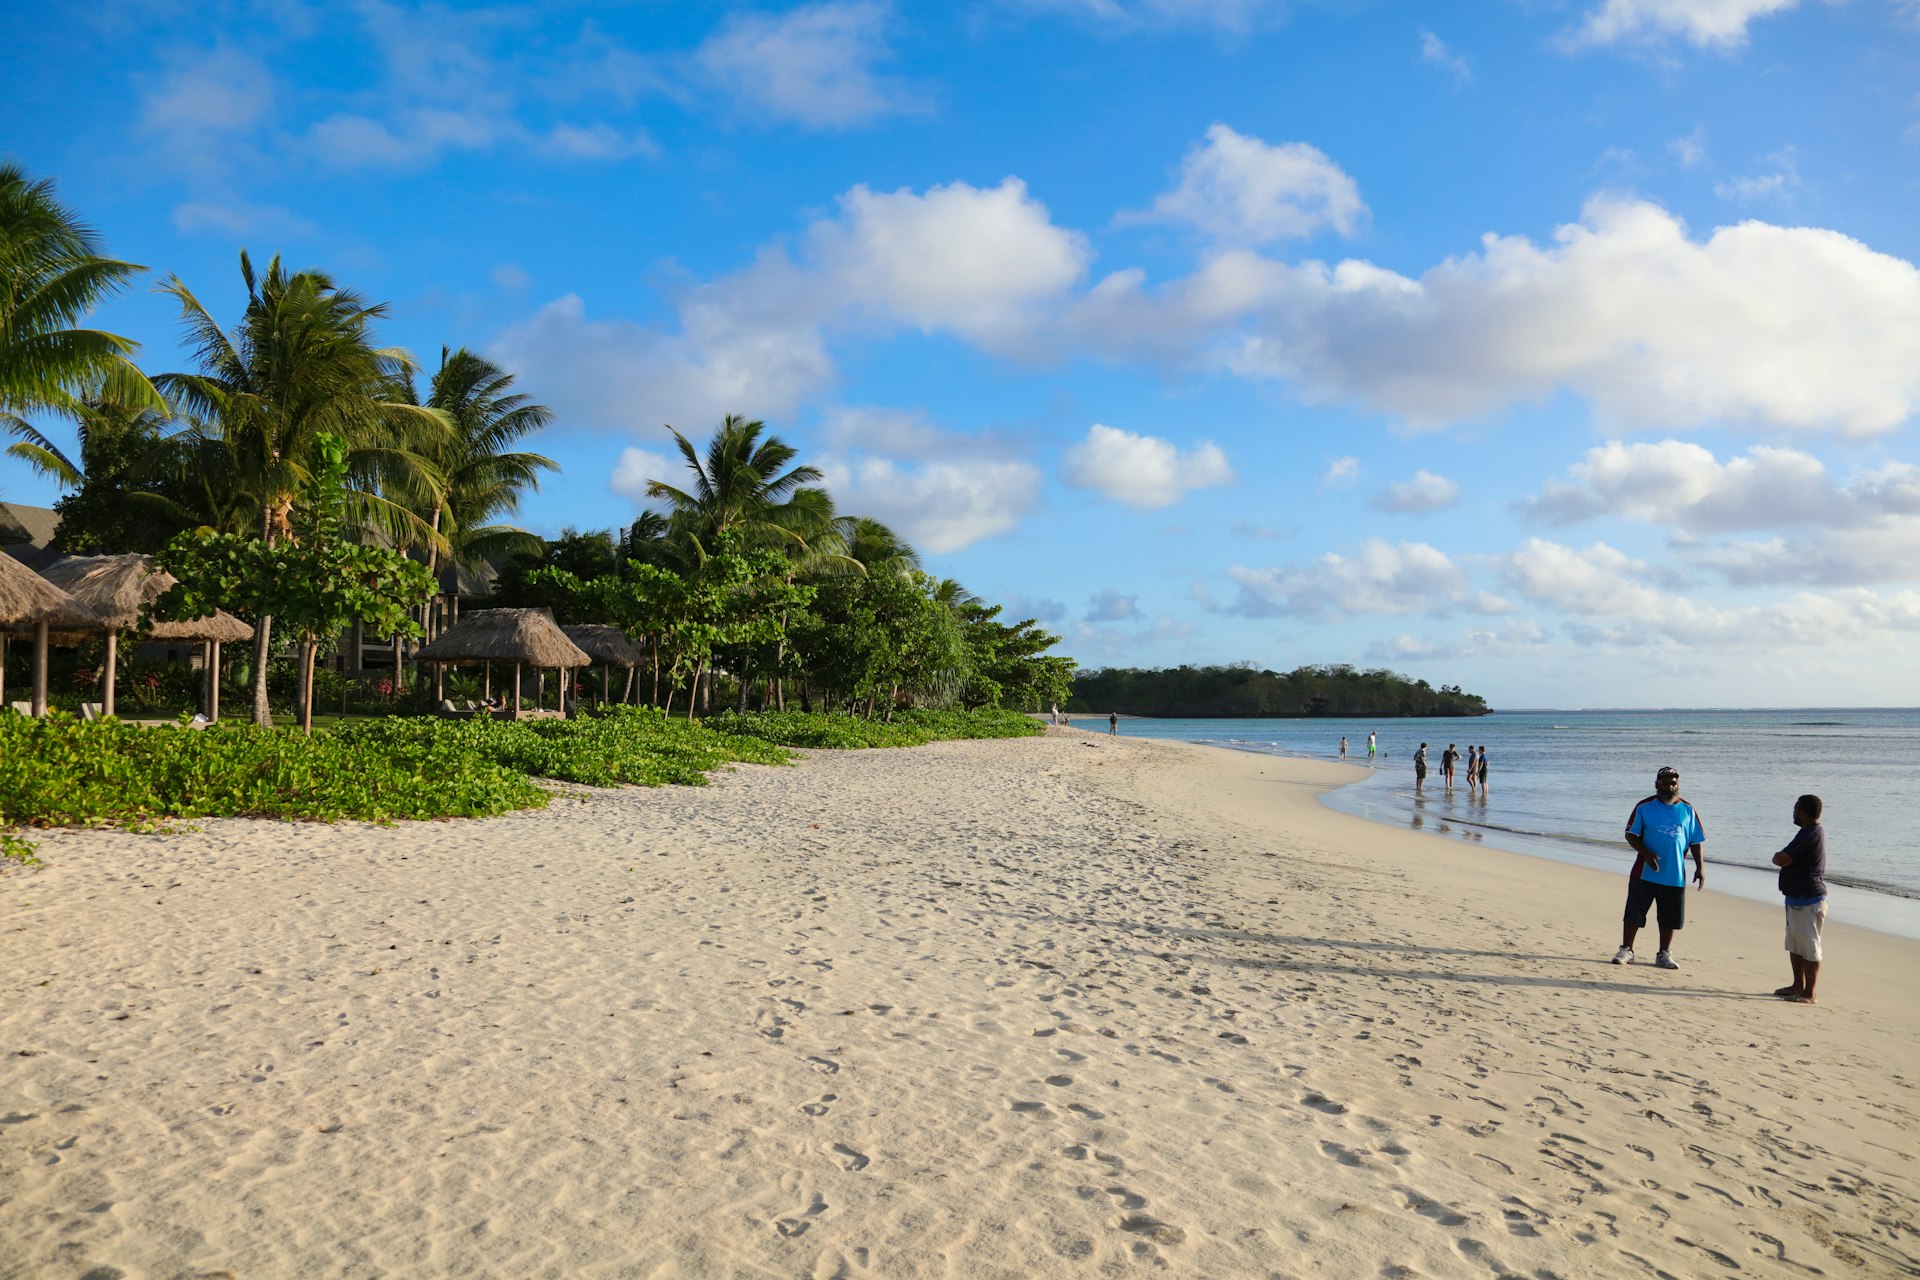 A wide section of sandy beach is backed by palm trees and lapped by blue water. A couple of rustic bungalows are visible amongst the palms behind the beach, while a few people paddle in the calm waters.